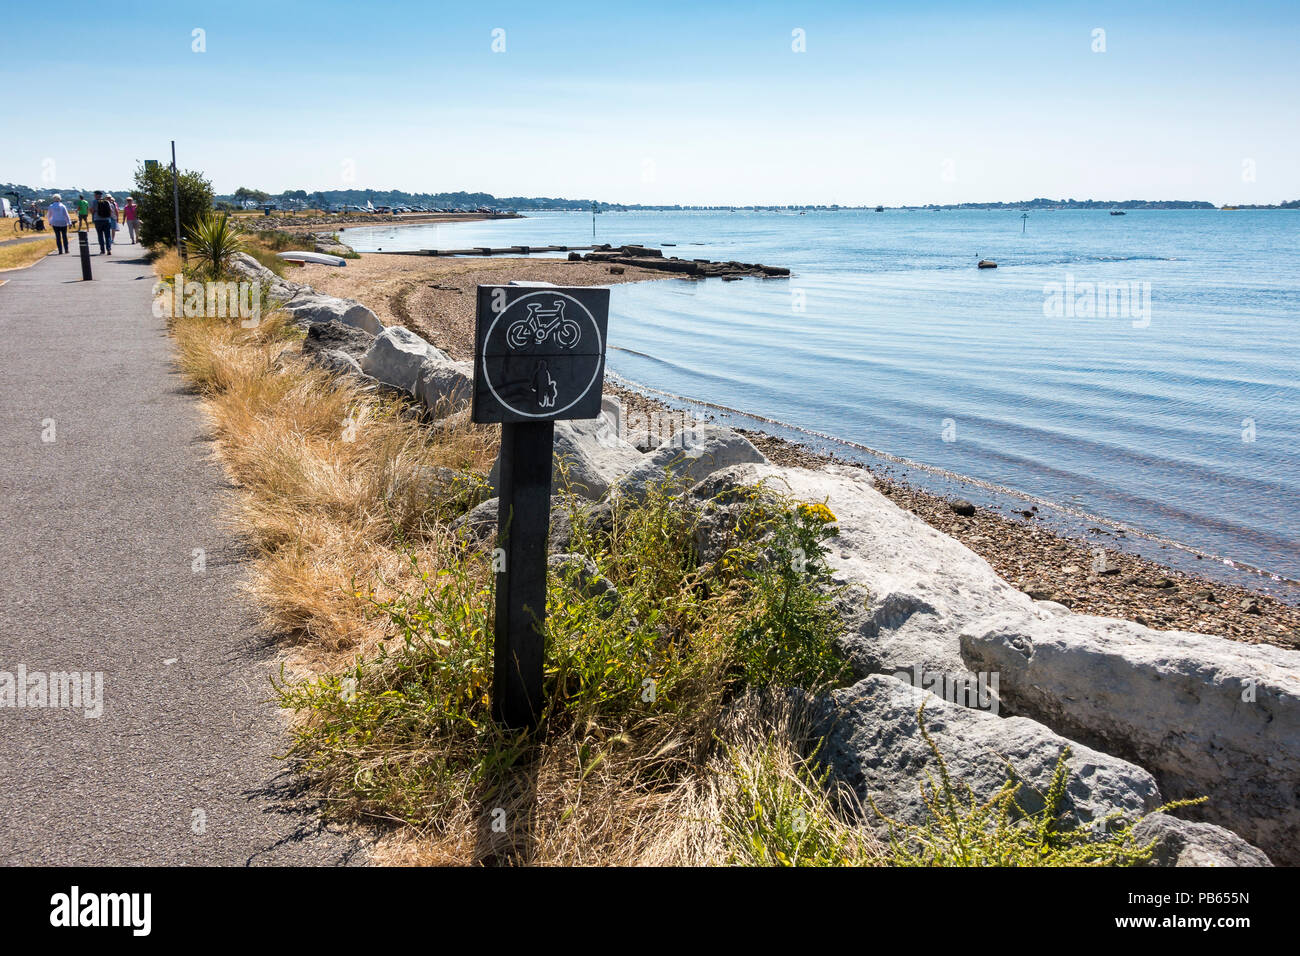 A footpath and bicycle pathway with a signpost alongside Poole Harbour, Dorset, United Kingdom Stock Photo